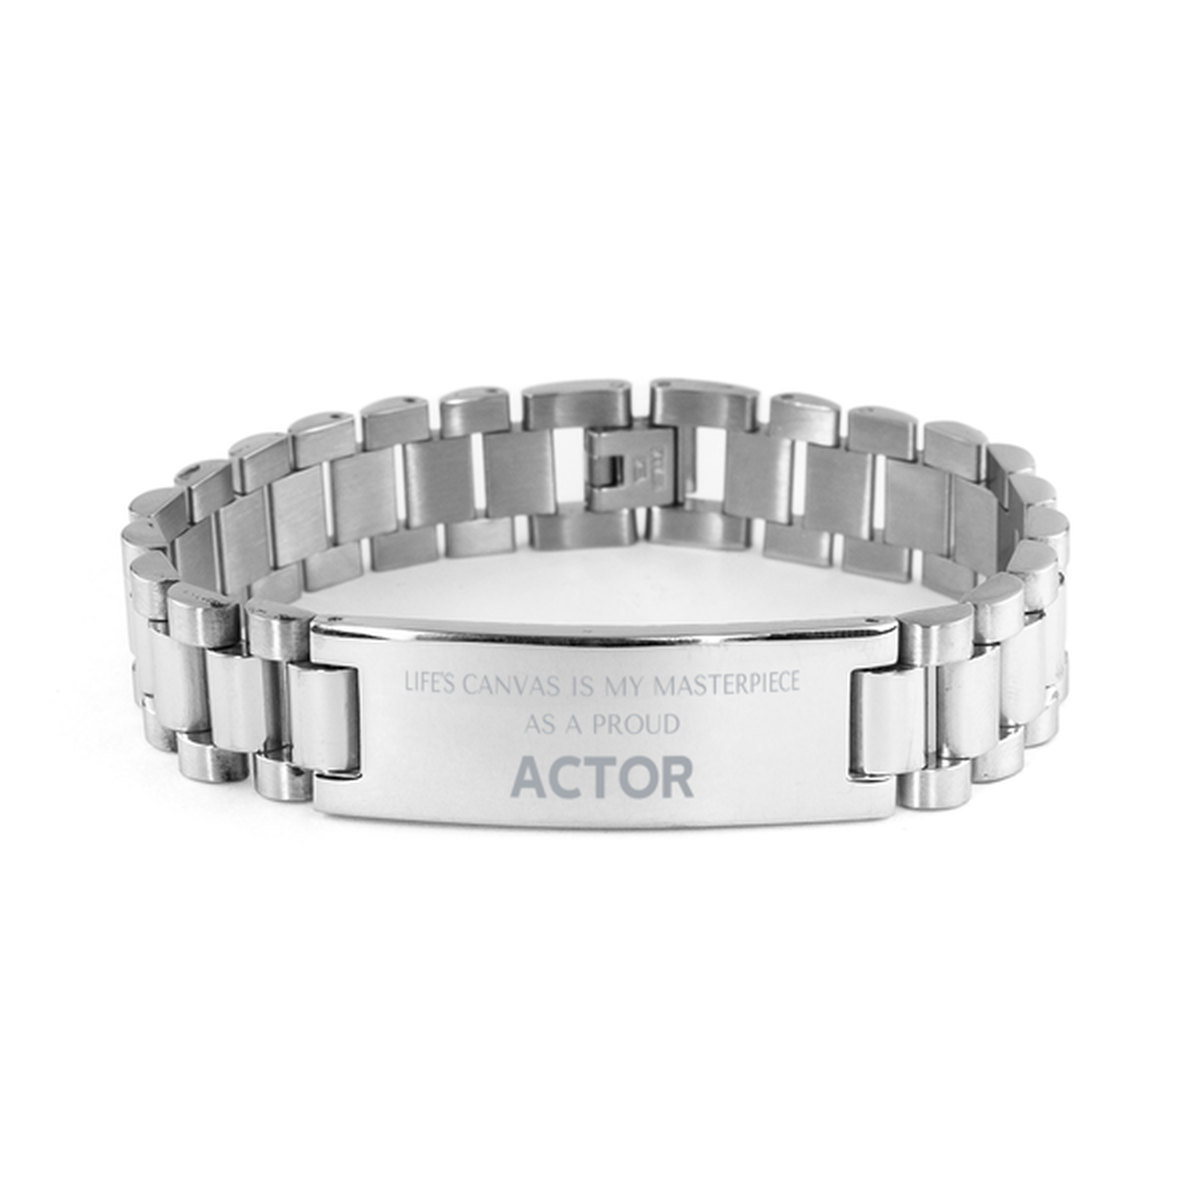 Proud Actor Gifts, Life's canvas is my masterpiece, Epic Birthday Christmas Unique Ladder Stainless Steel Bracelet For Actor, Coworkers, Men, Women, Friends